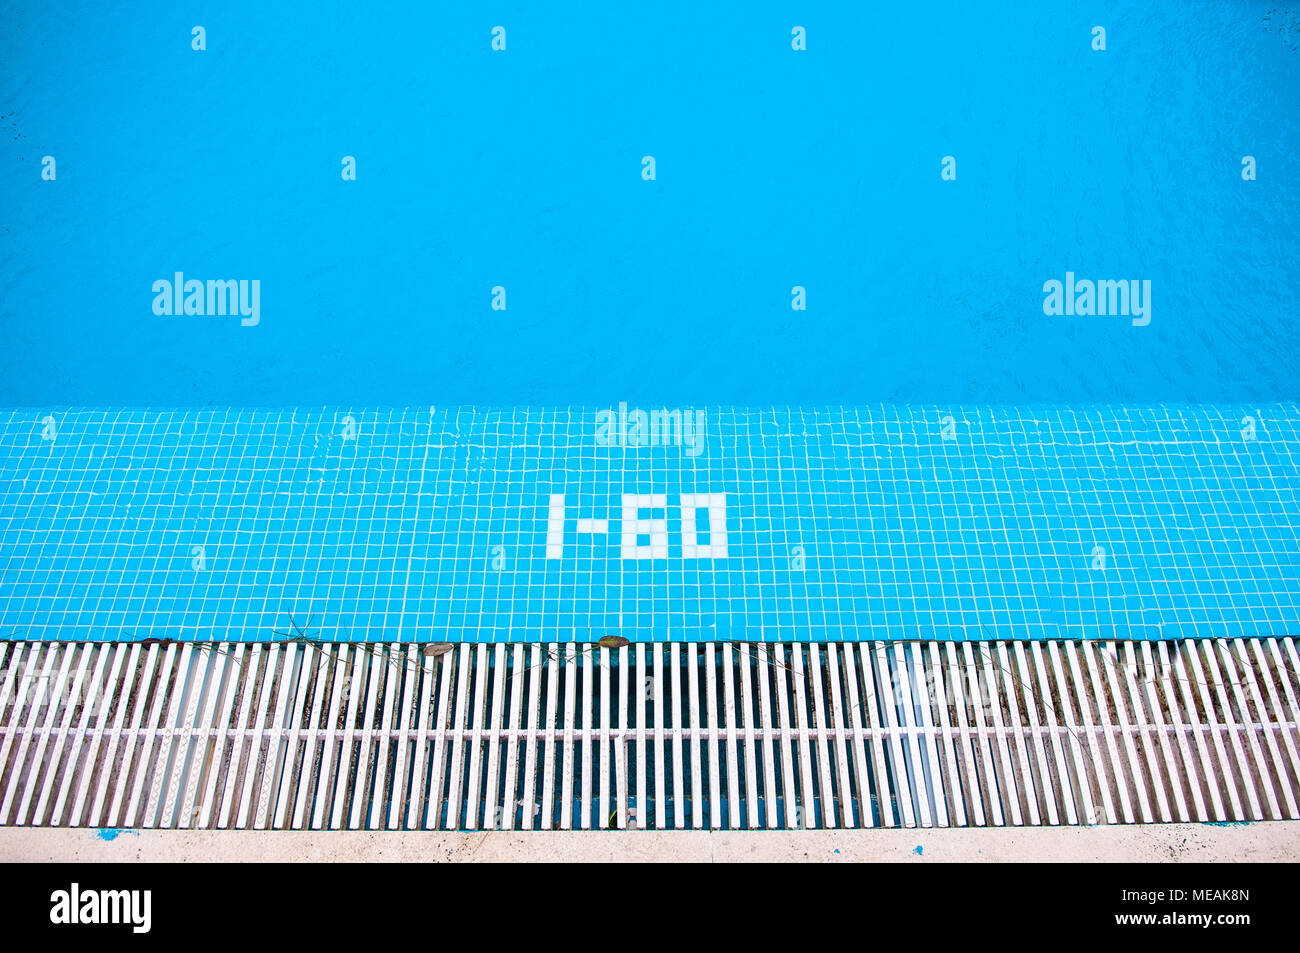 Depth indicator of 1.60m at a hotel swimming pool. Stock Photo